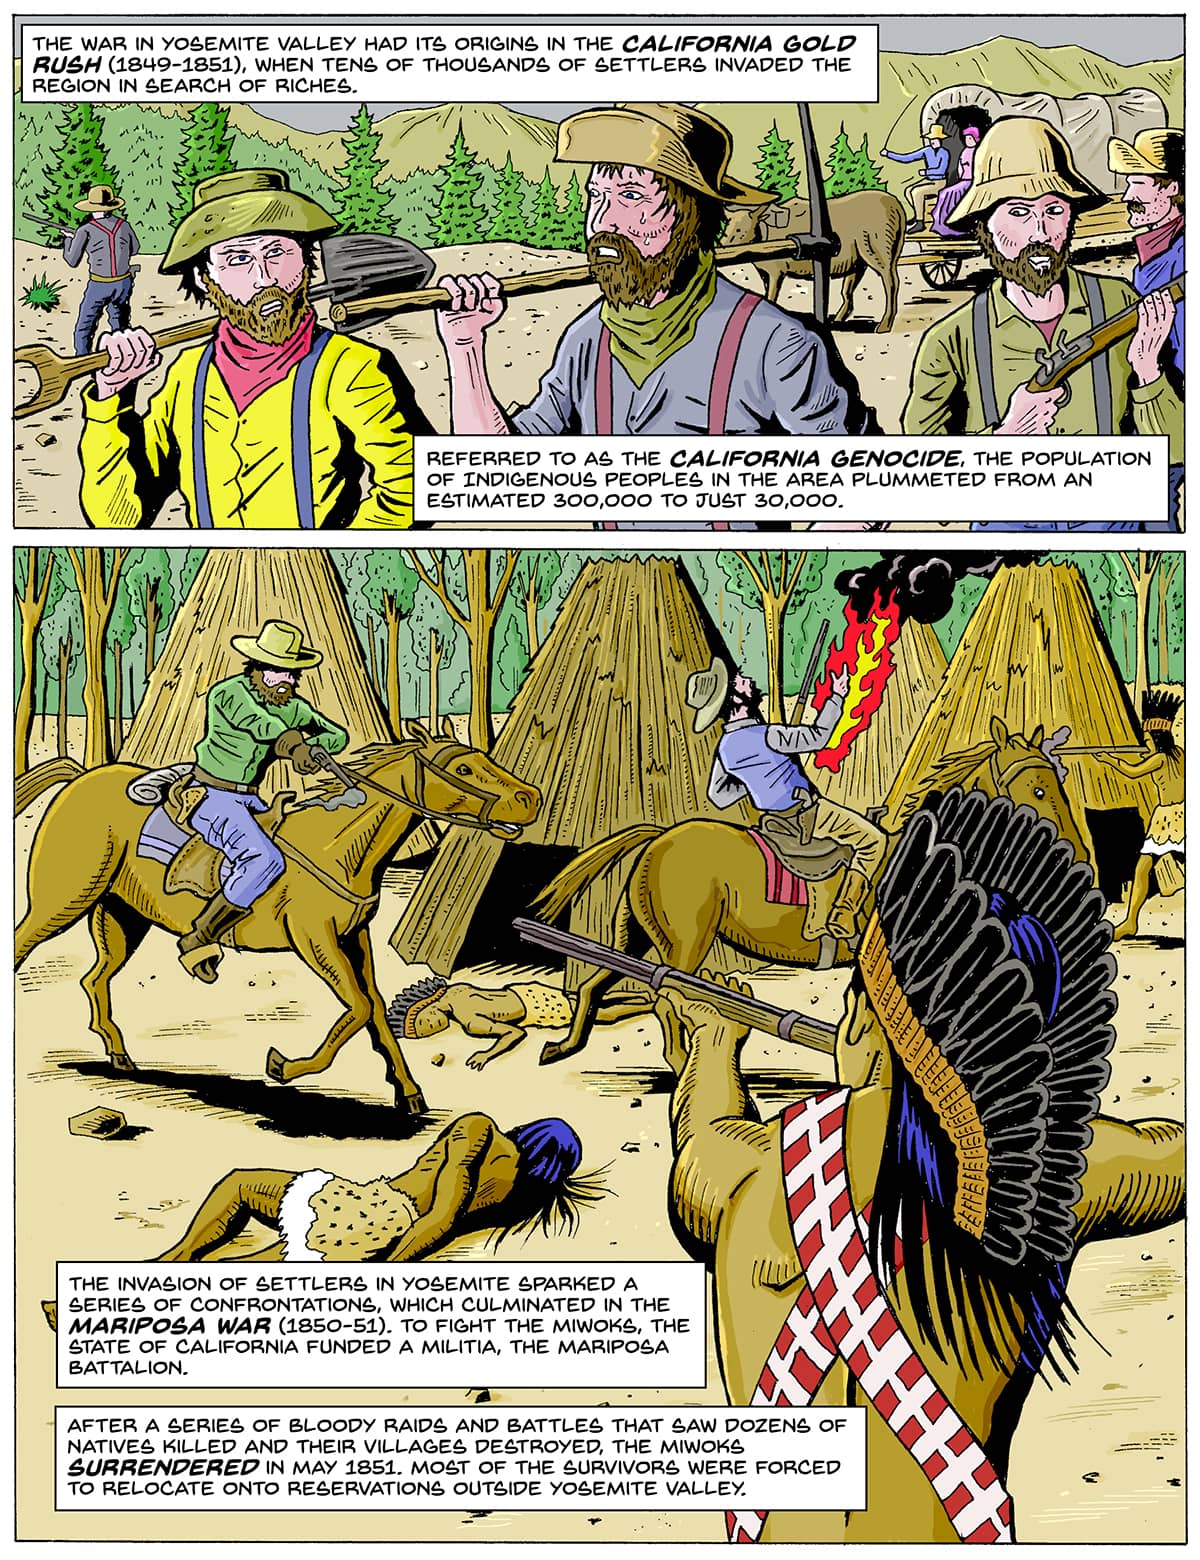 Two comic panels. Top: A group of men (settlers) with guns and hats walk past a line of trees. Bottom: The settlers ride on horseback and shoot at an Indigenous person wearing a bandolier of bullets and holding a rifle. There is a body of an Indigenous person on the ground. Text: The war in Yosemite Valley had its origins in the California Gold Rush (1849-1851), when tens of thousands of settlers invaded the region in search of riches. Referred to as the California Genocide, the population of Indigenous peoples in the area plummeted from an estimated 300,000 to just 30,000. The invasion of settlers in Yosemite sparked a series of confrontations, which culminated in the Mariposa War (1850-51). To fight the Miwoks, the state of California funded a militia, the Mariposa Battalion. After a series of bloody raids and battles that saw dozens of Natives killed and their villages destroyed, the Miwoks surrendered in May 1851. Most of the survivors were forced to relocate onto reservations outside Yosemite Valley.